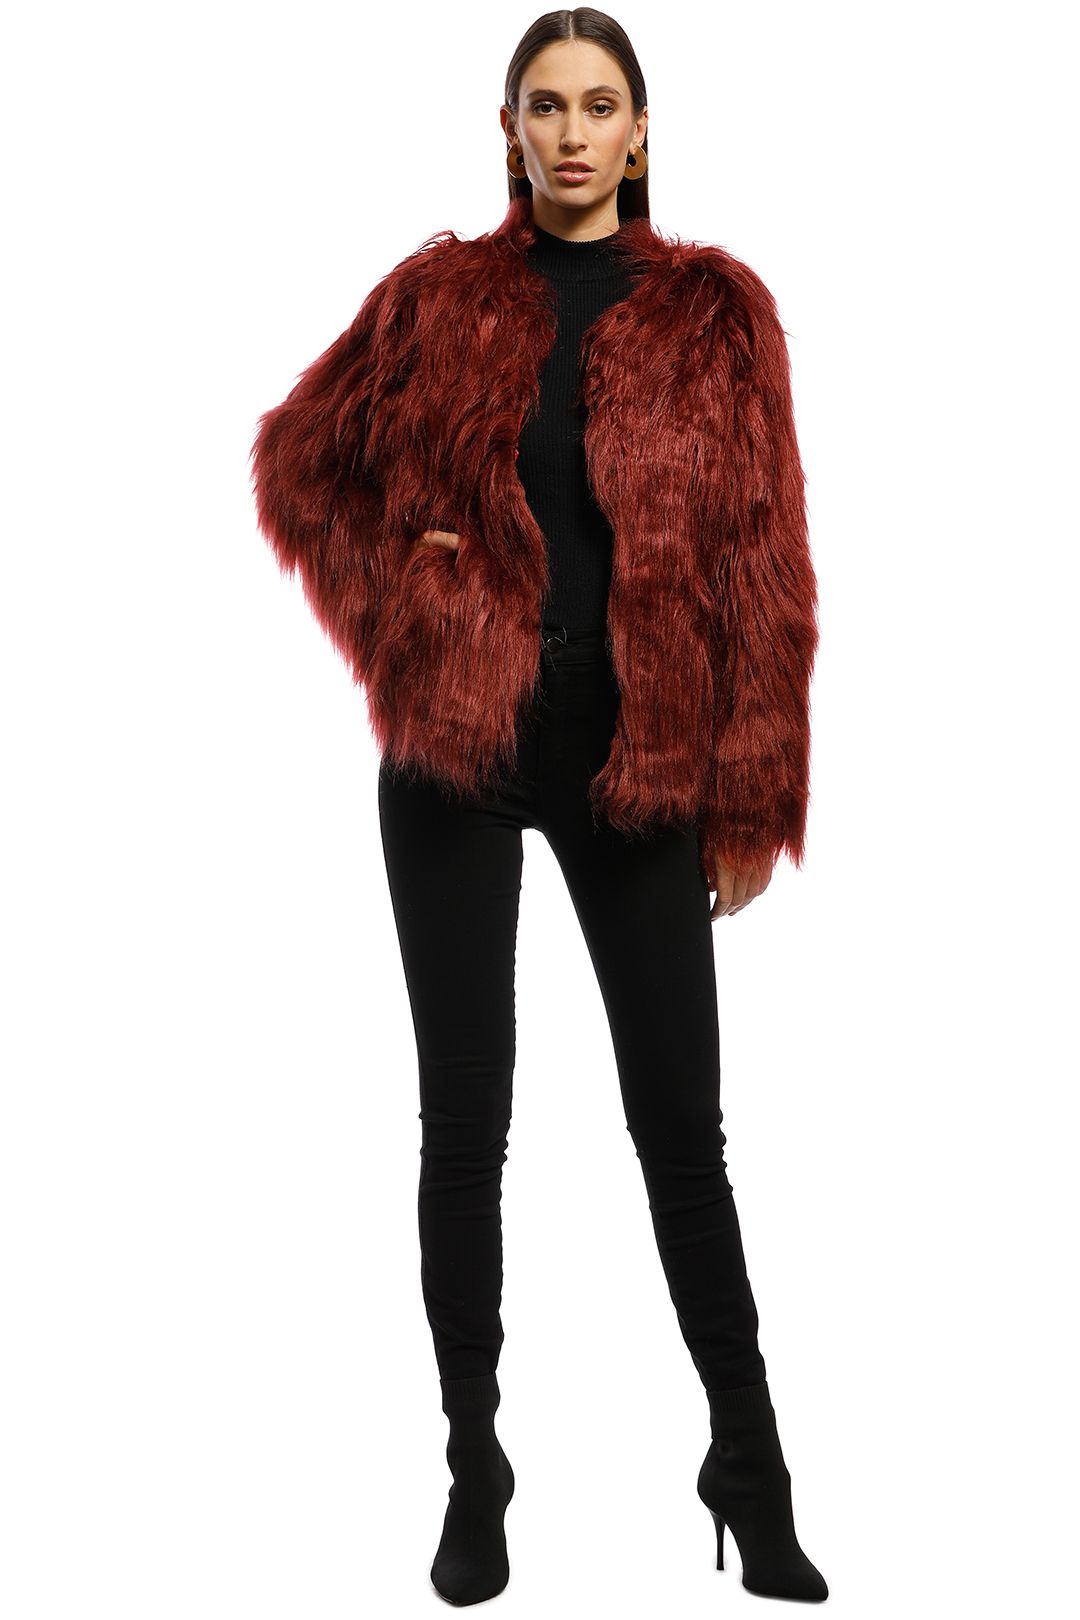 Everly - Marmont Faux Fur Jacket - Wine - Front